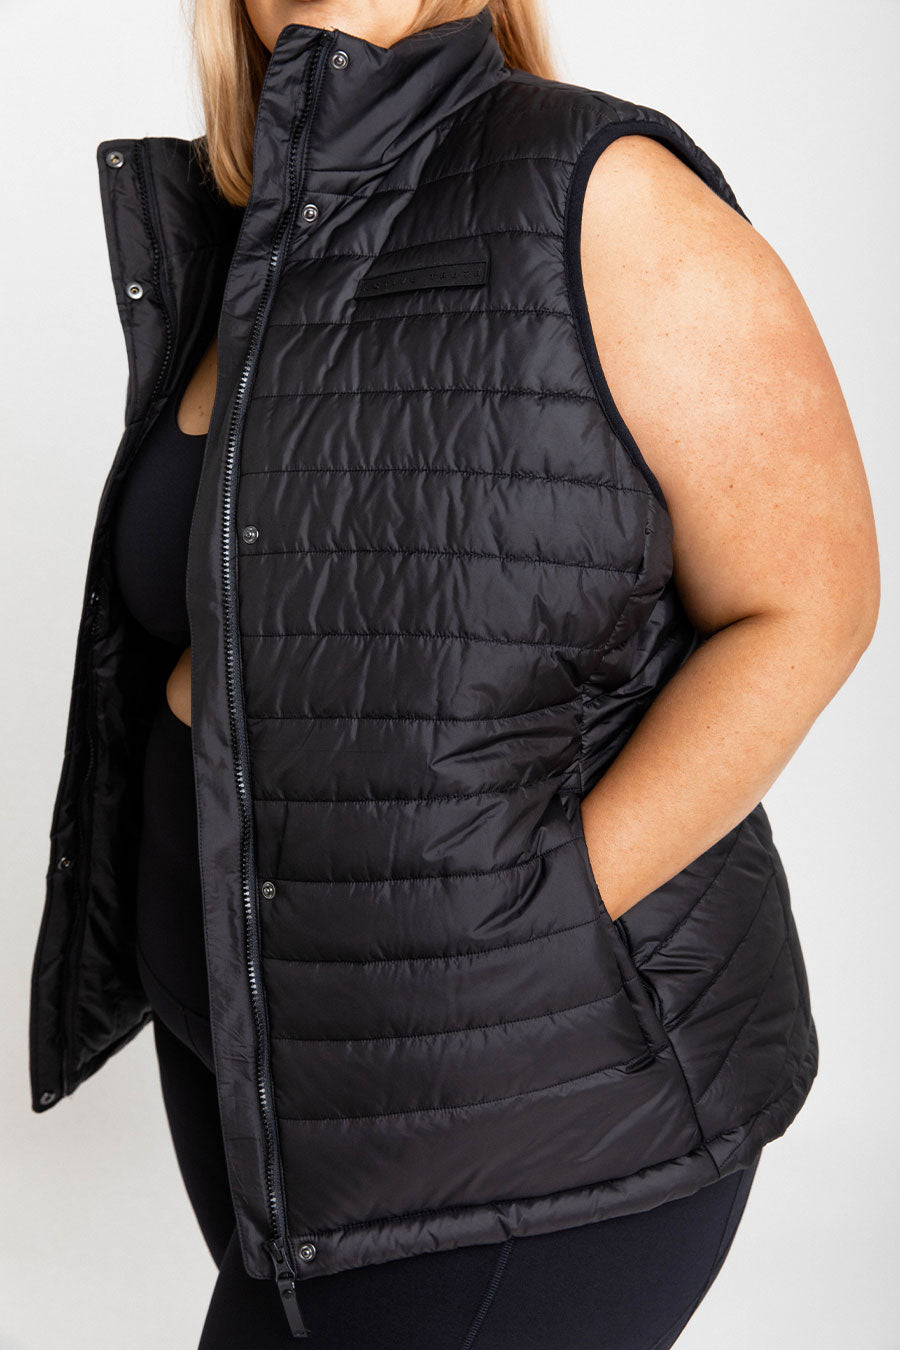 Lifestyle Puffa Vest - Black from Active Truth™
